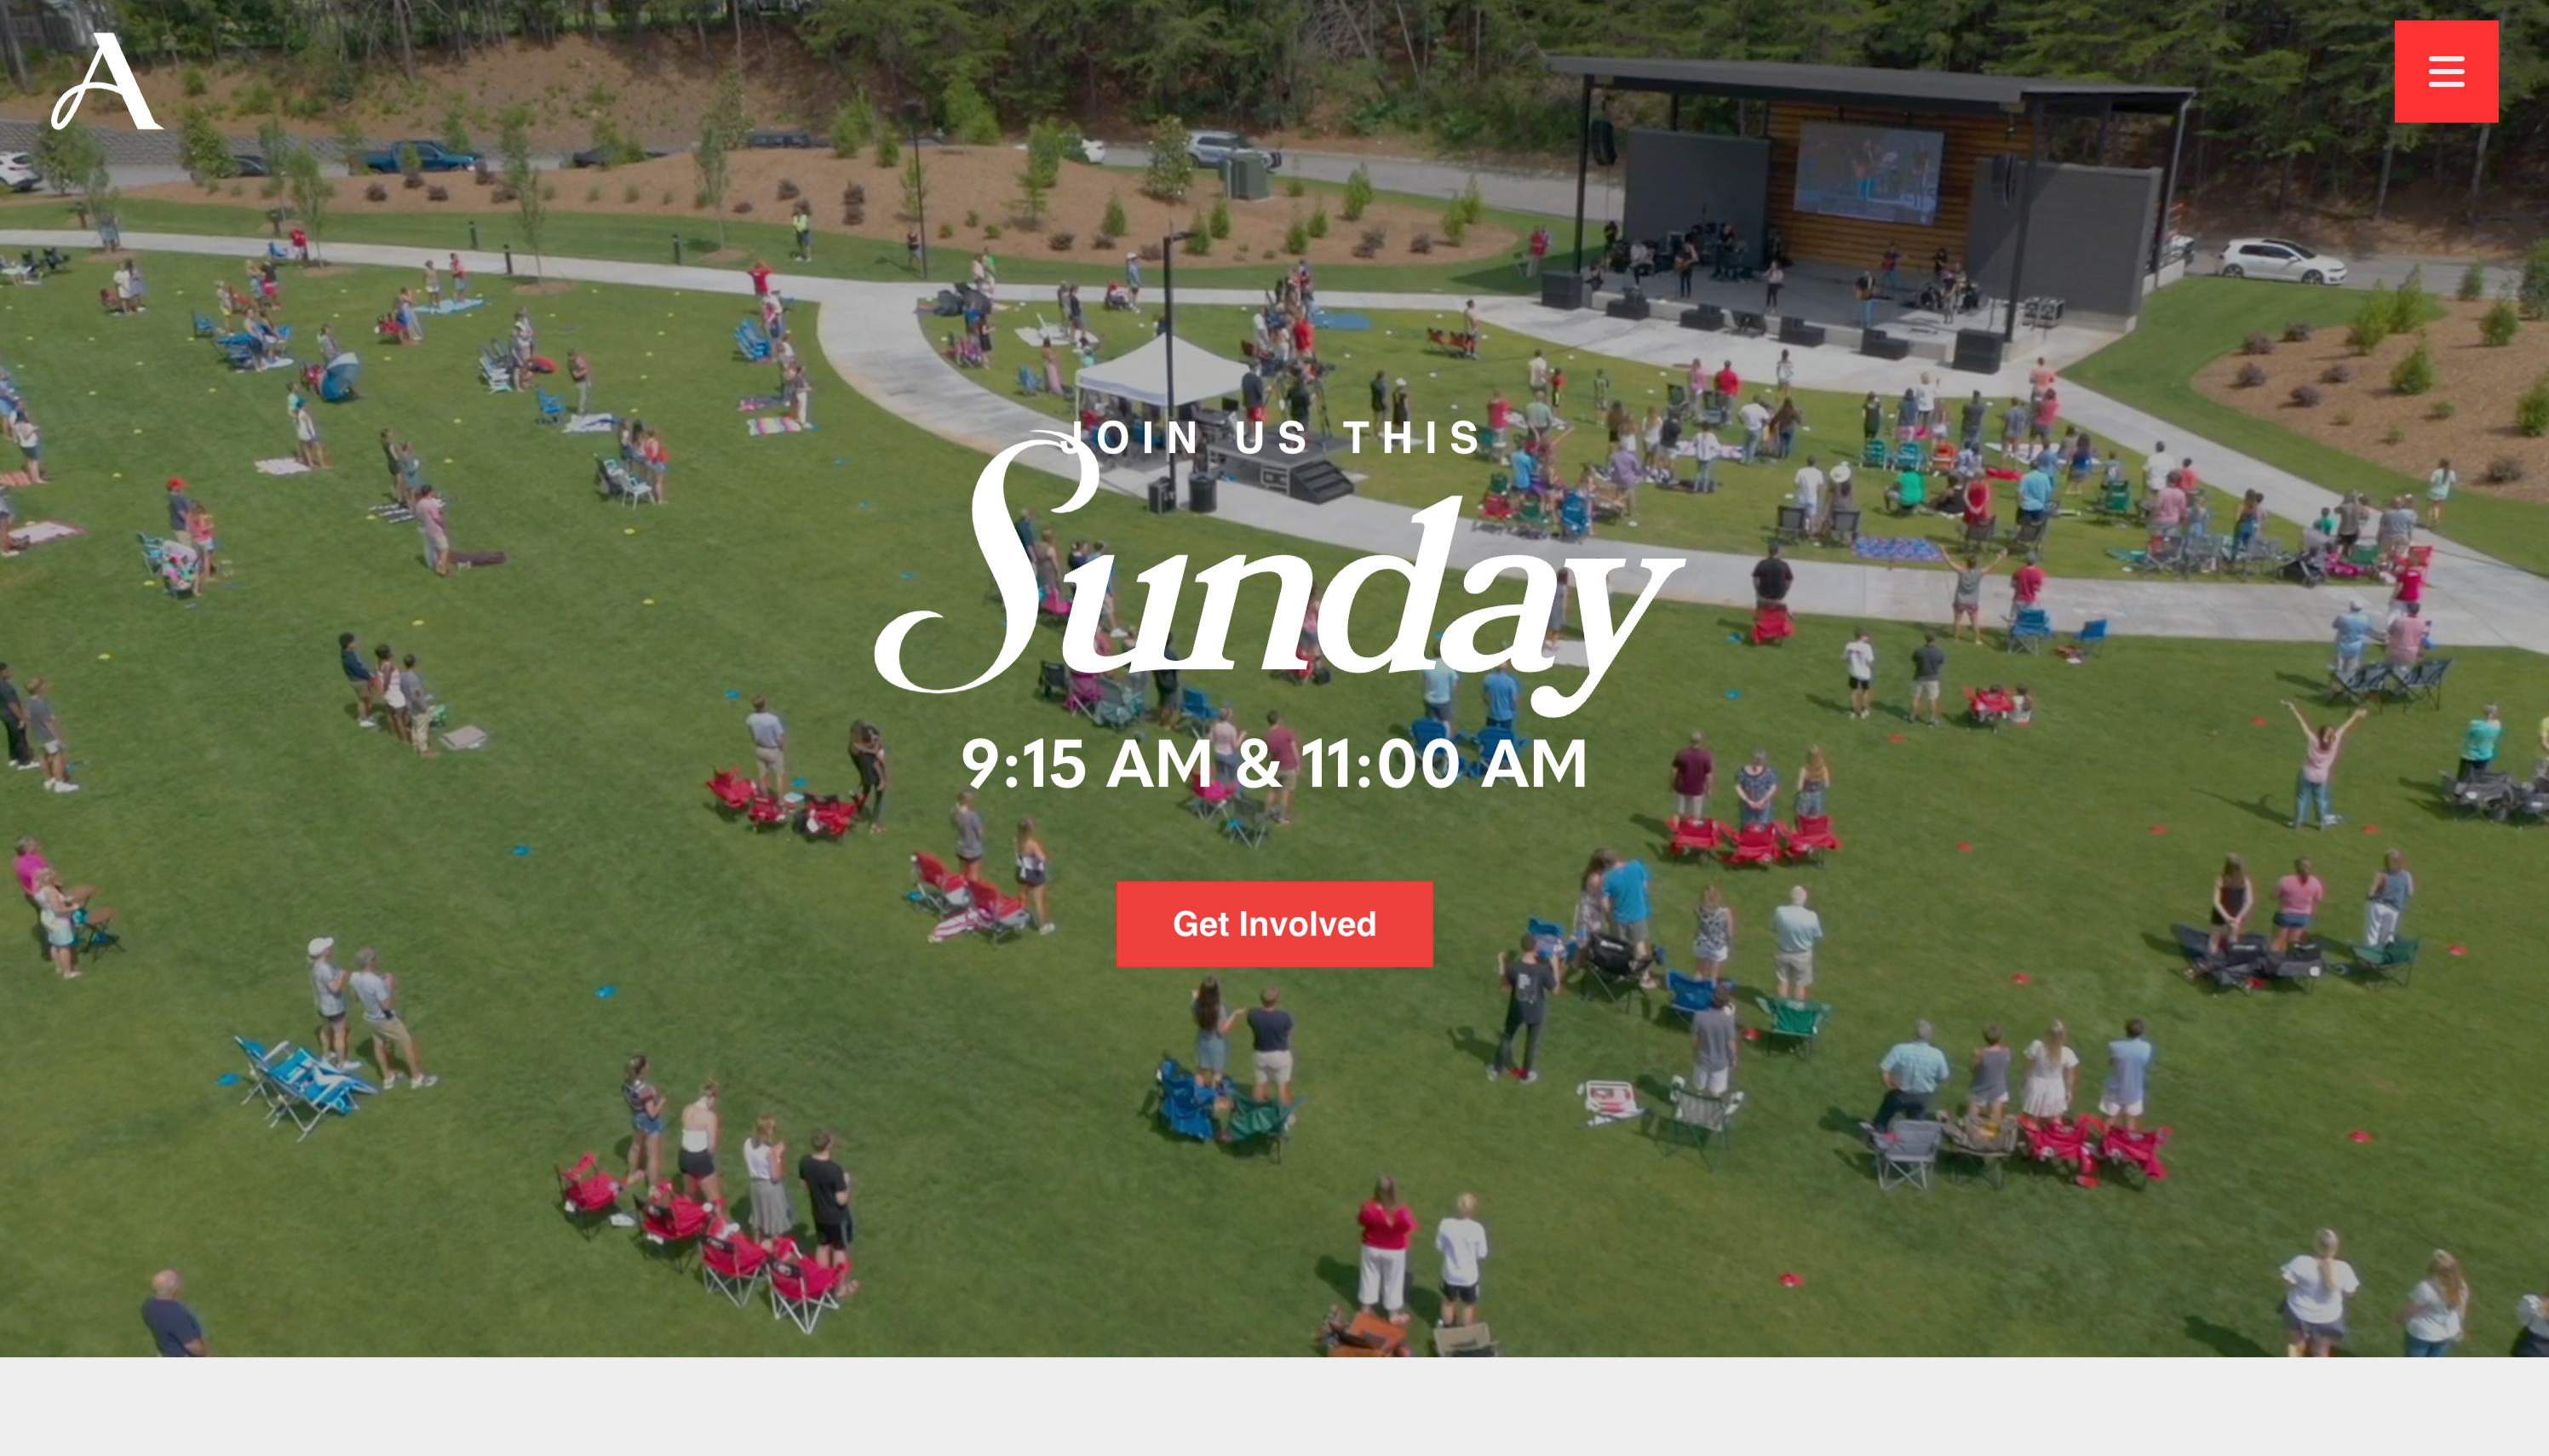 Website image from Athens Church located in Athens, GA.